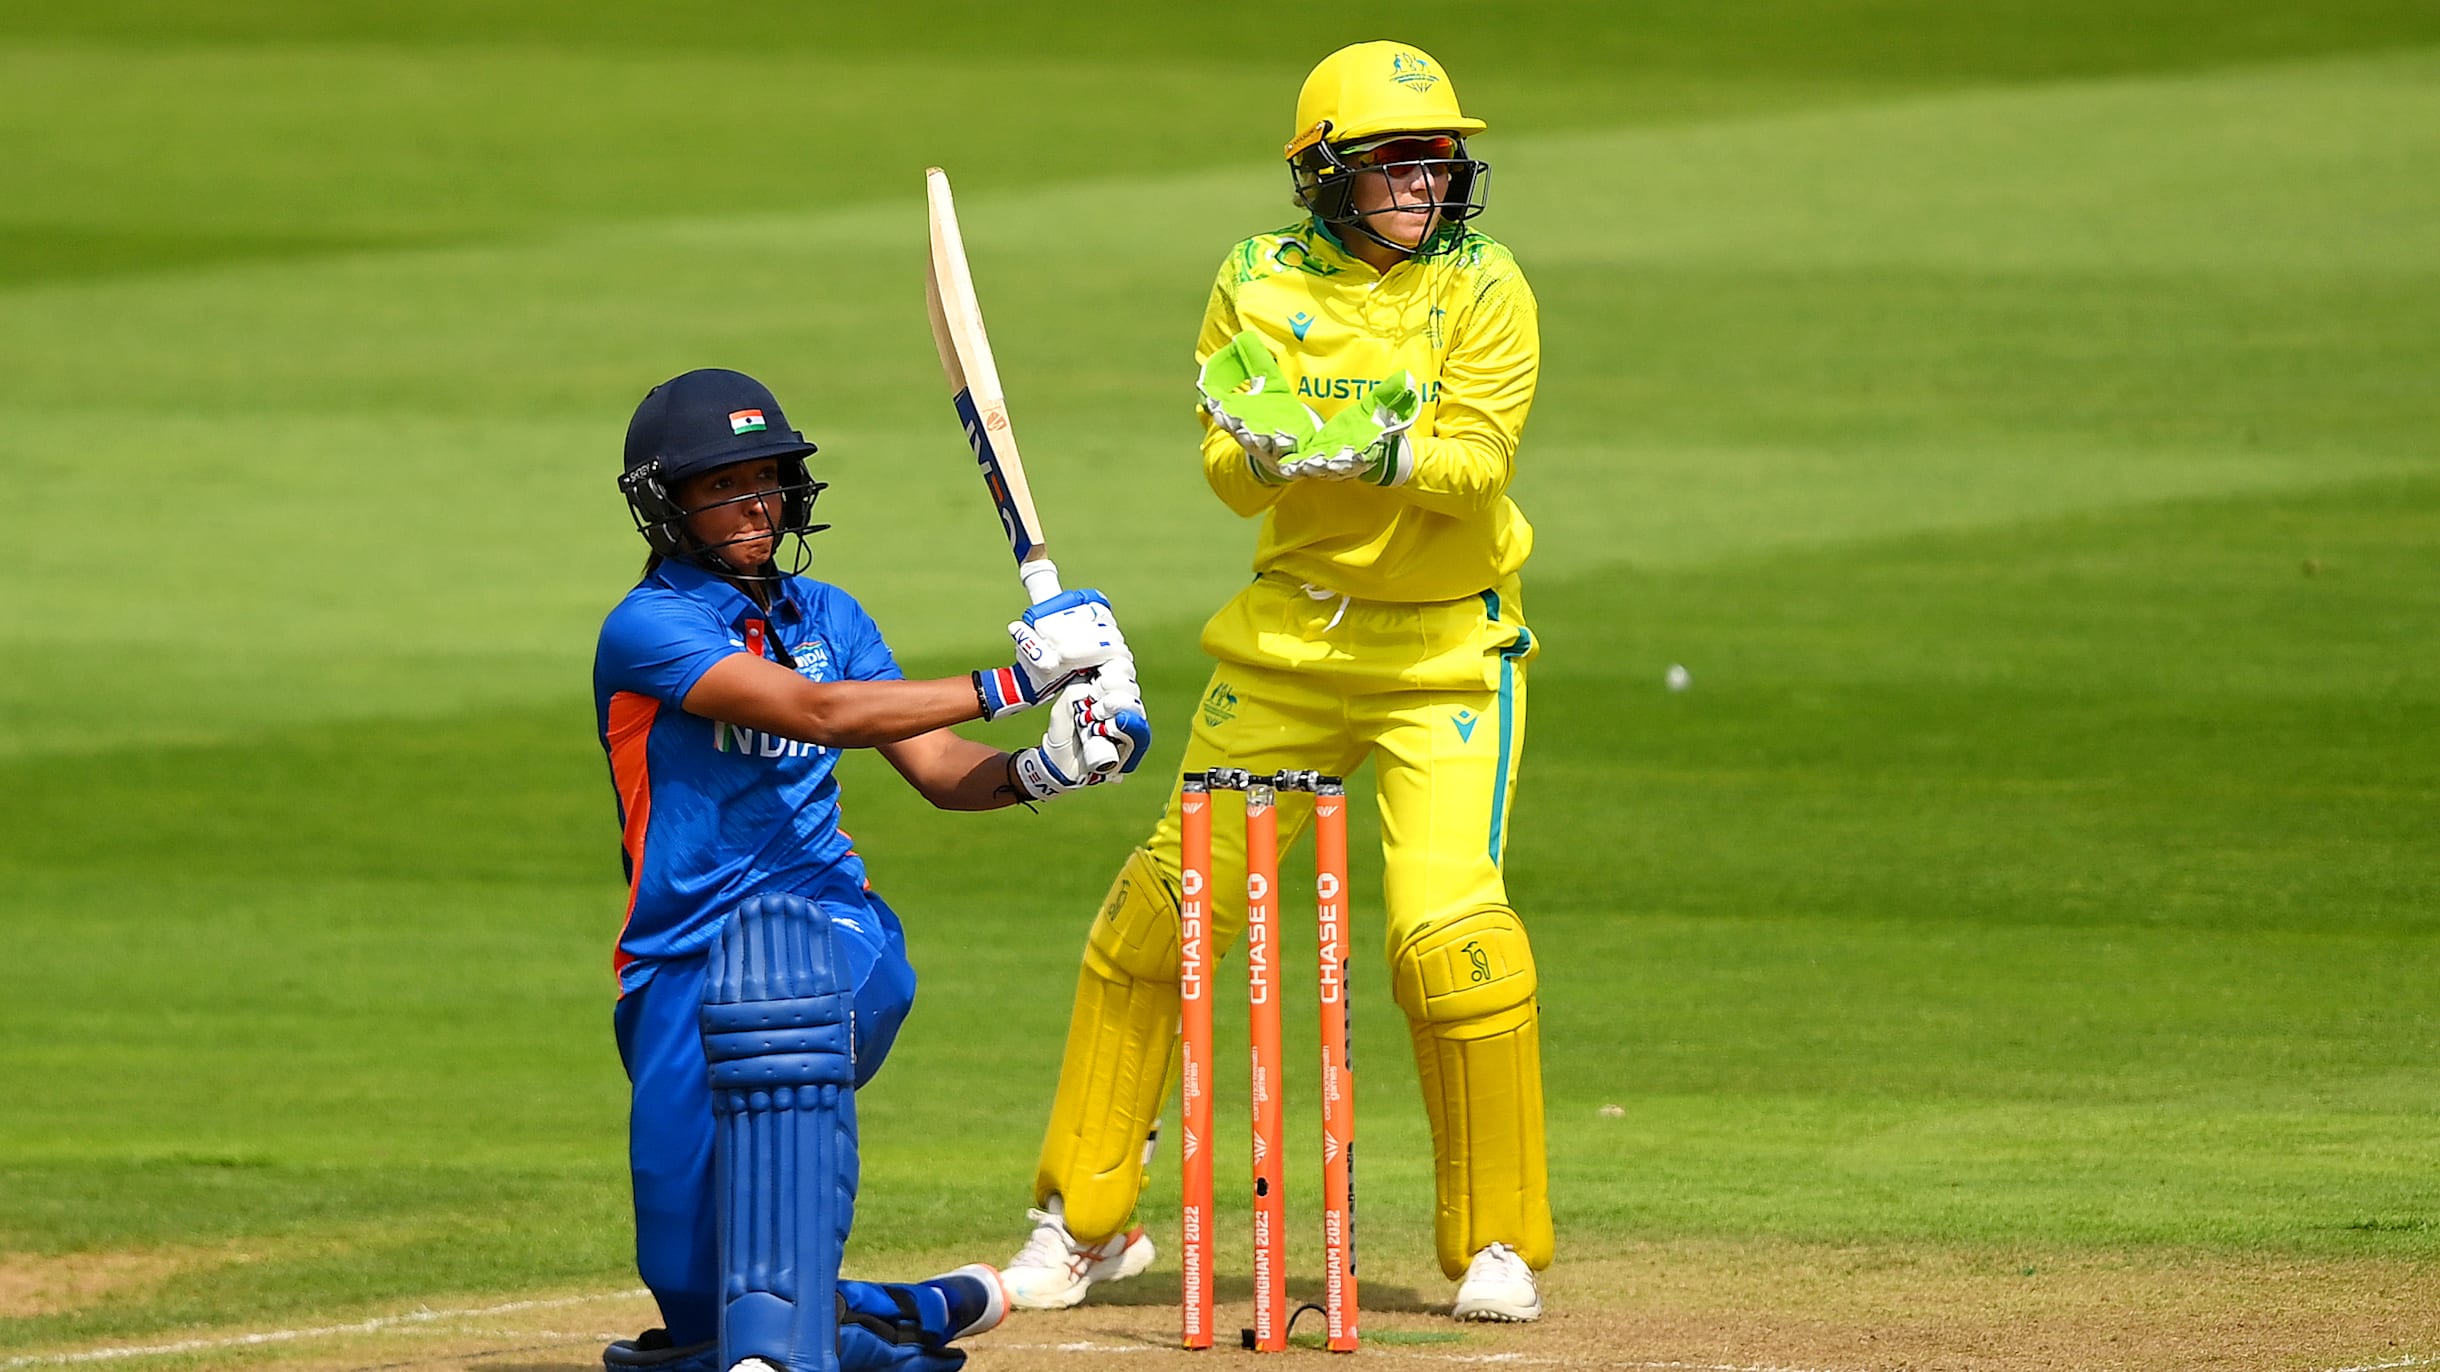 Commonwealth Games 2022 cricket results and scores